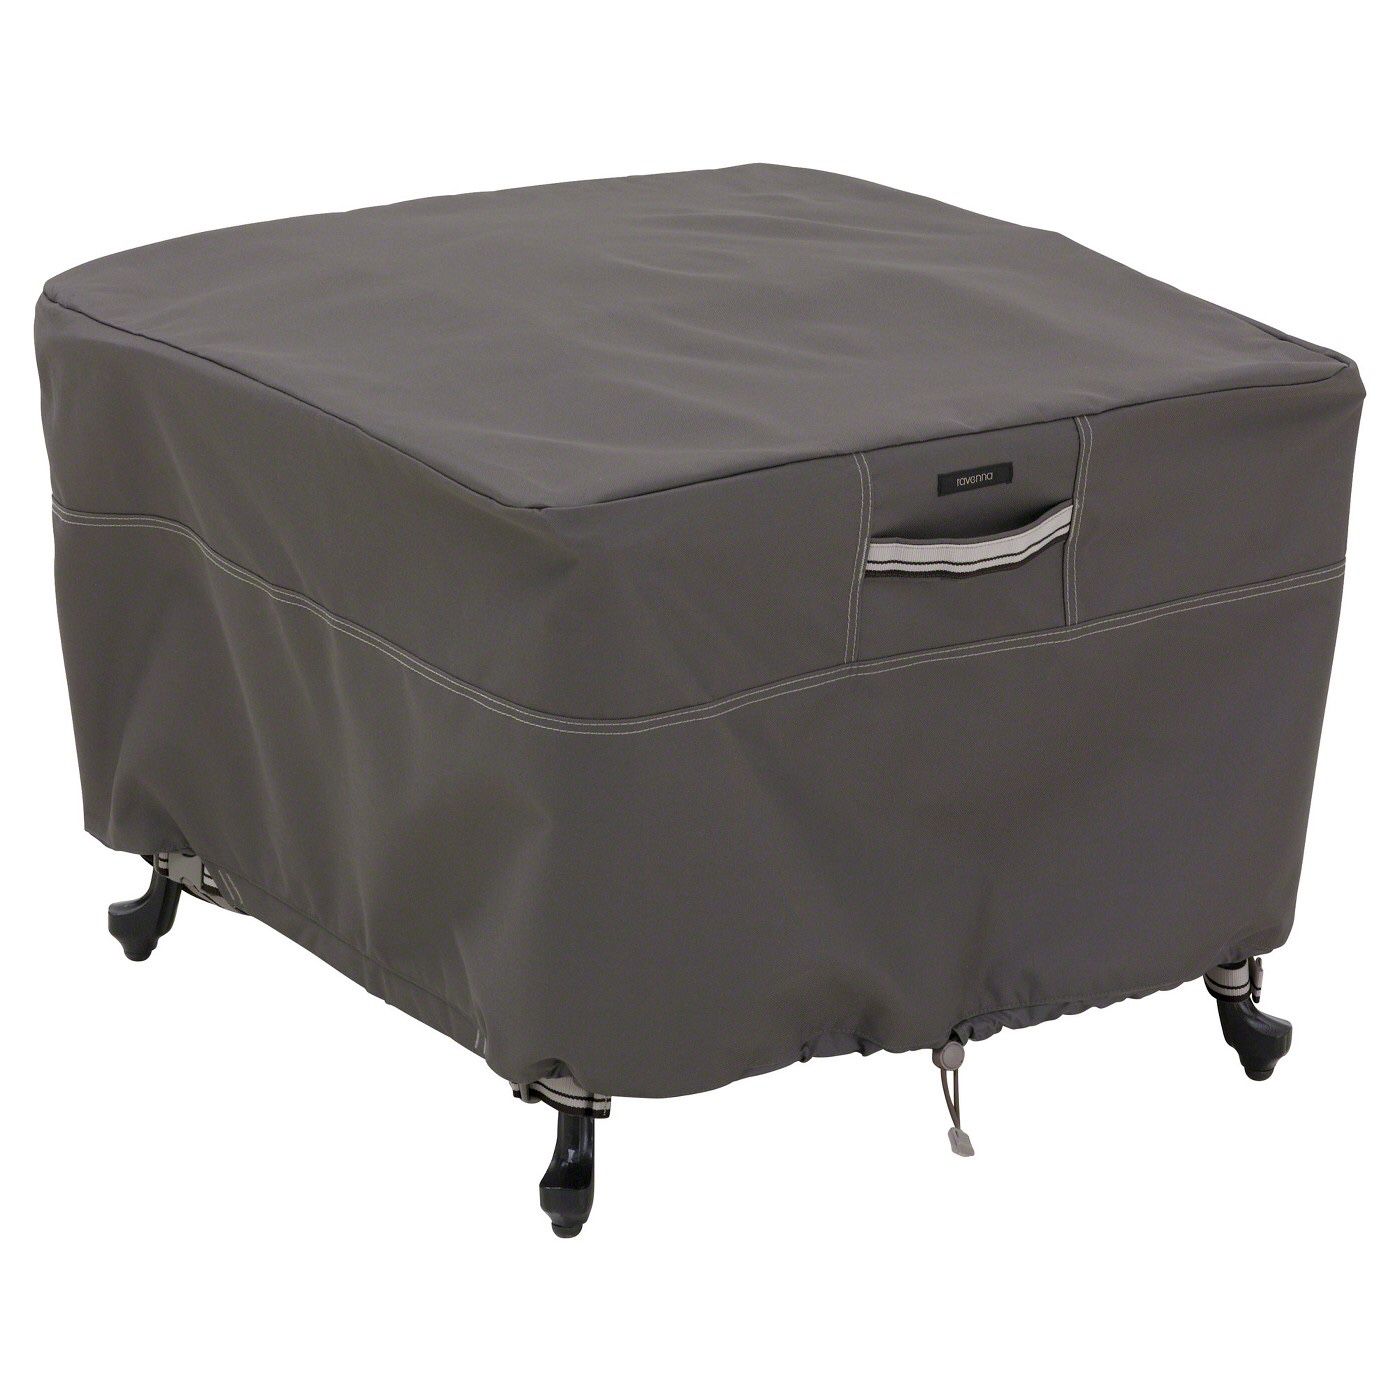 Ravenna Patio Furniture Cover for Ottoman / Table